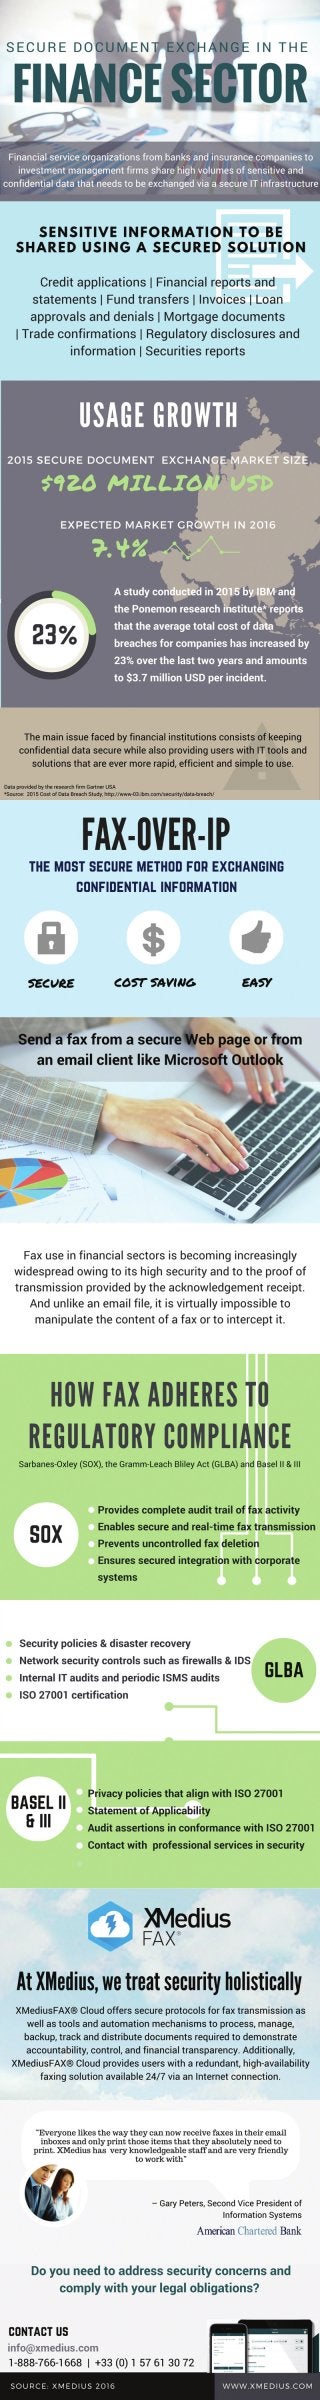 How using contemporary fax solutions can help companies in the financial services sector meet their various legal obligations